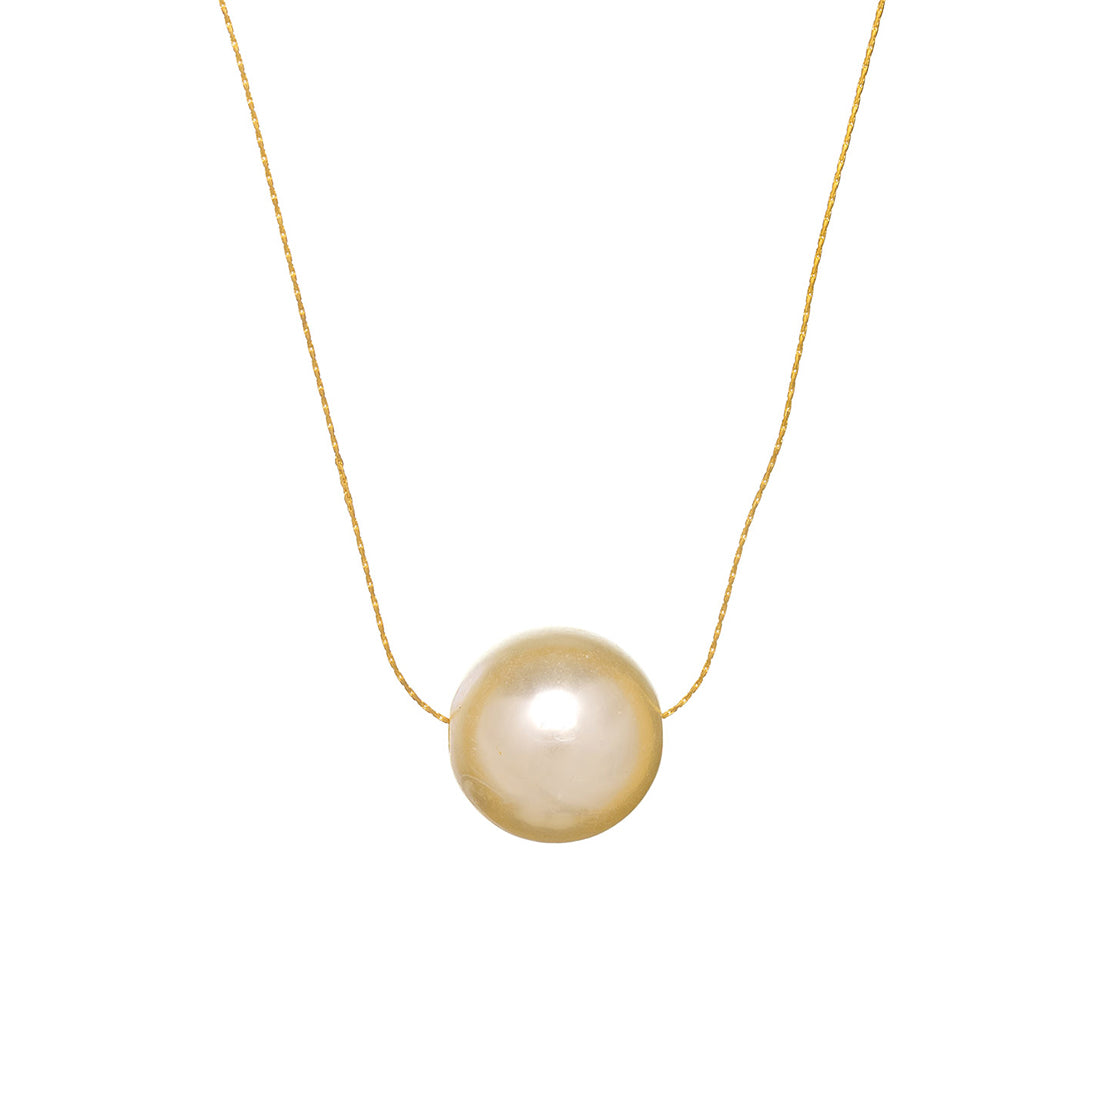 Modern Oversized Pearl Pendant On Gold-Toned Chain